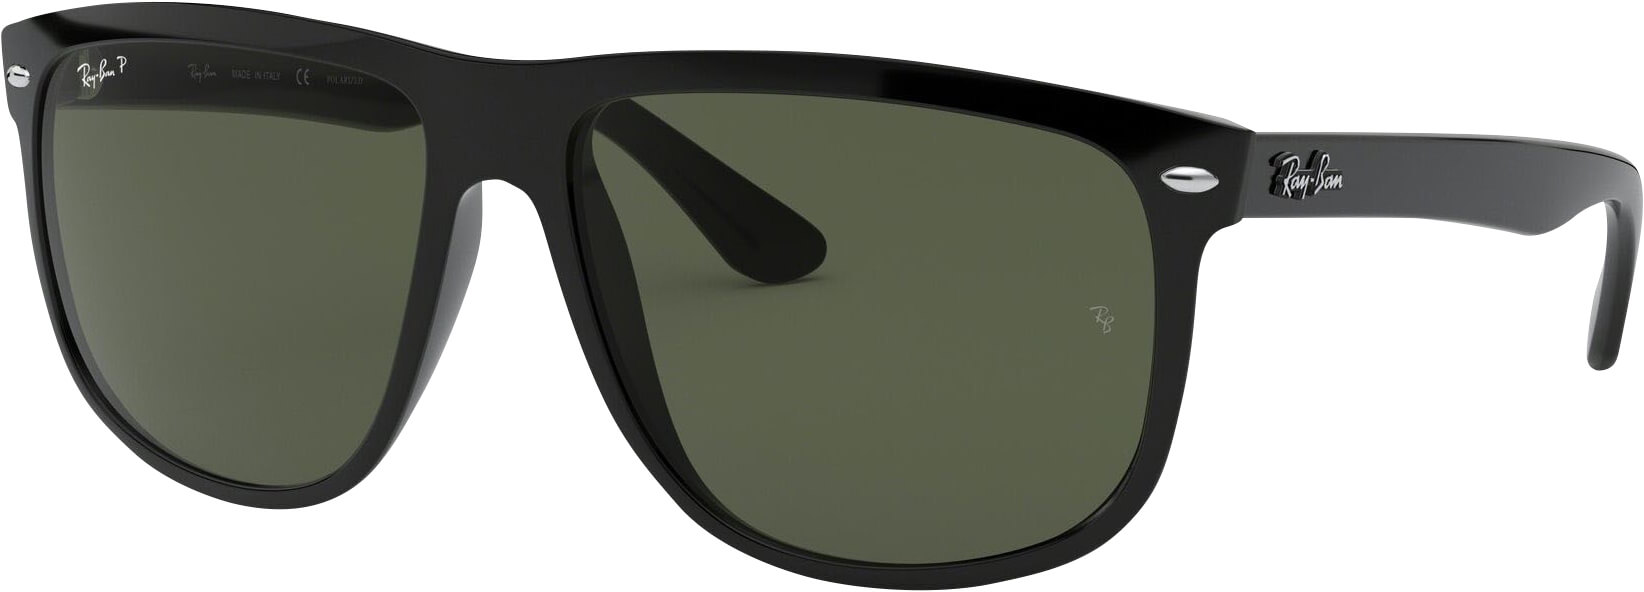 Ray-Ban BOYFRIEND 4147 image number null